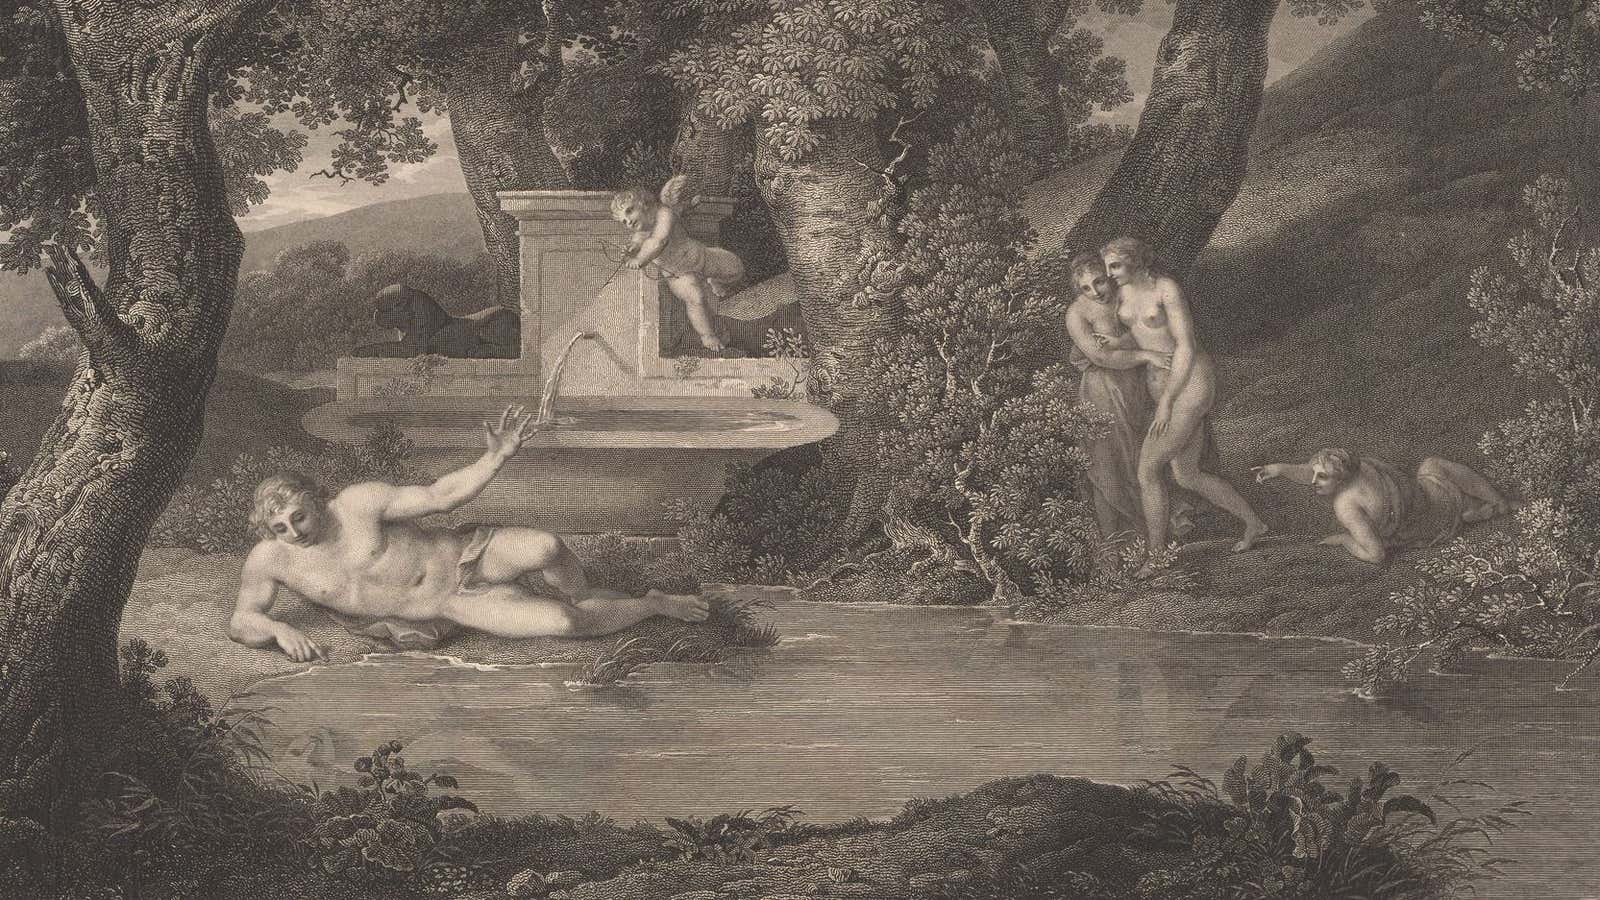 Narcissus meets his fate.